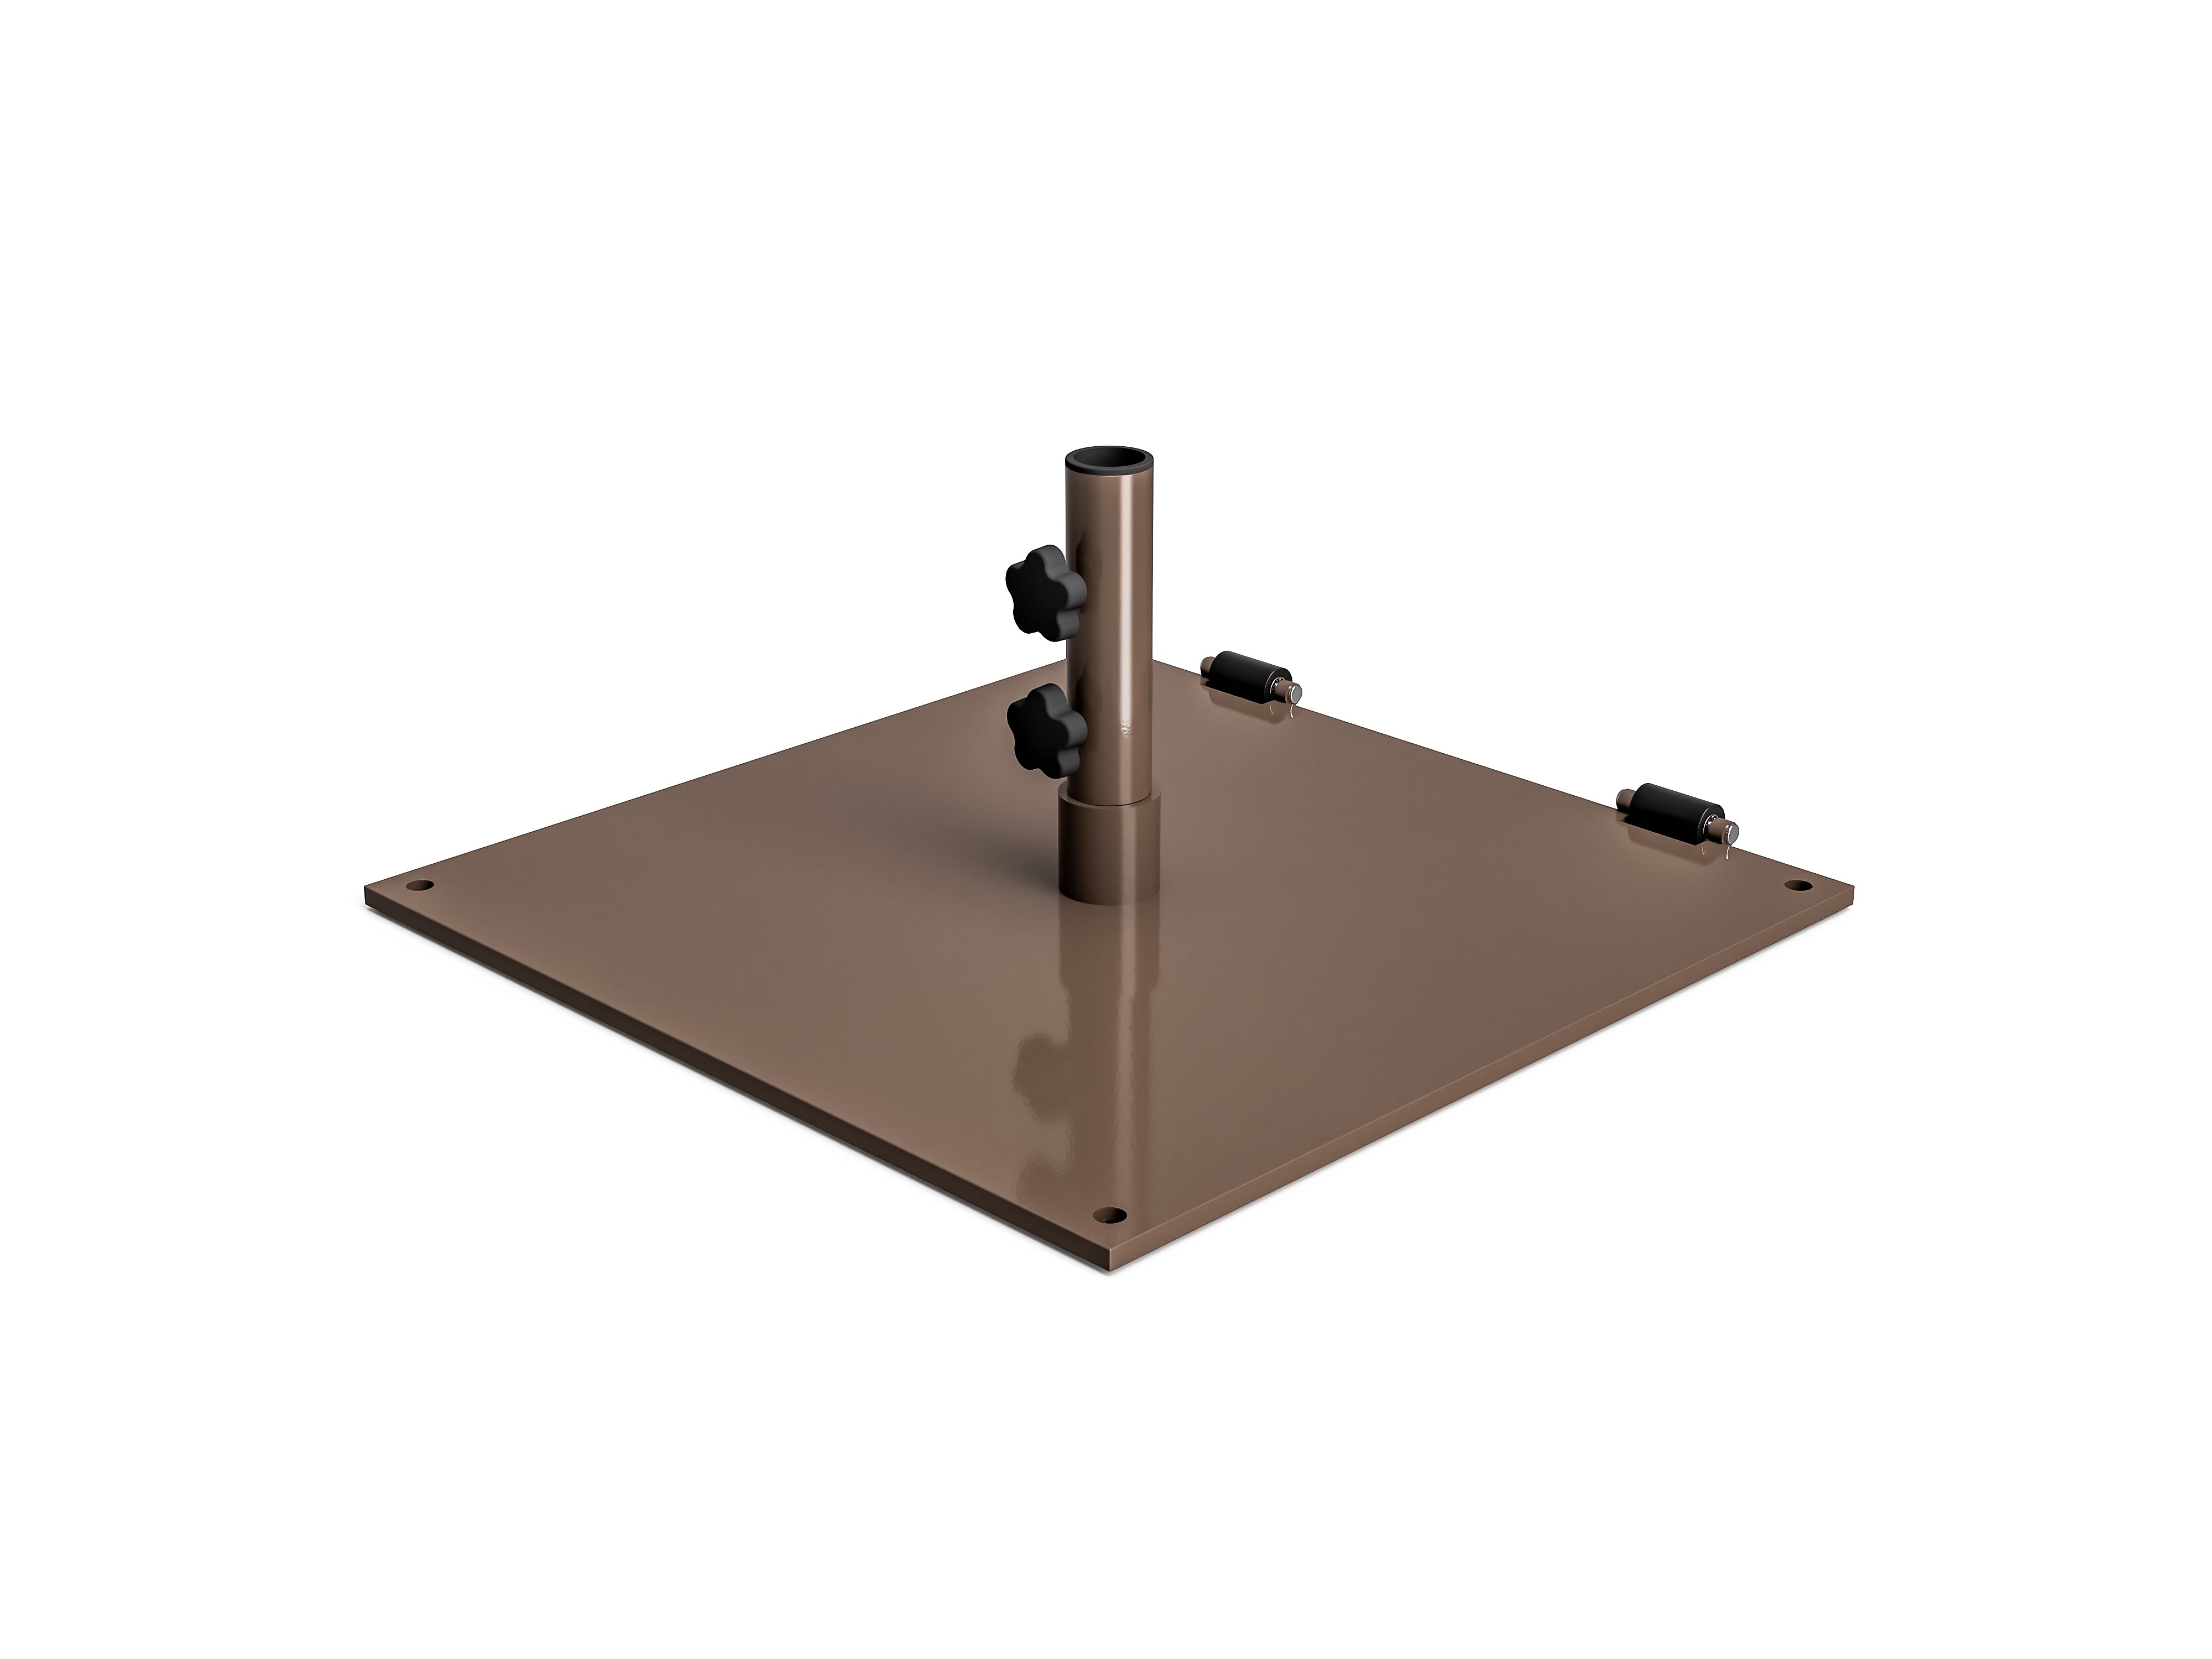 75LB Steel Plate Base with side wheel by Frankford Umbrella